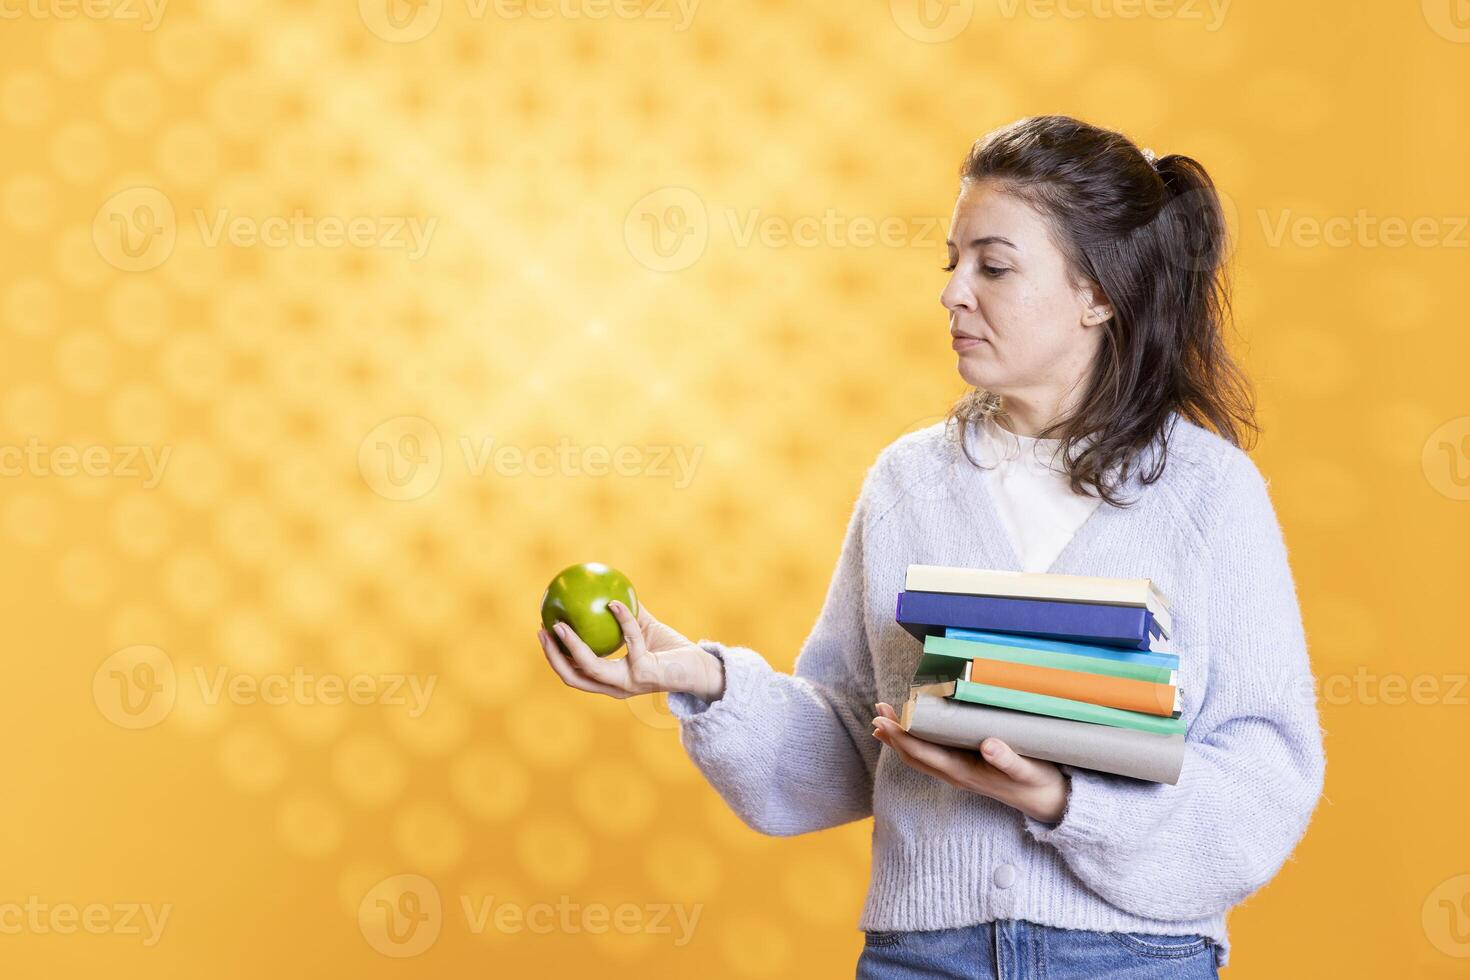 Woman with stack of books in hands enjoying fresh apple, living healthy, isolated over studio background. Bookworm holding pile of novels and green fruit, enjoying bio snack photo